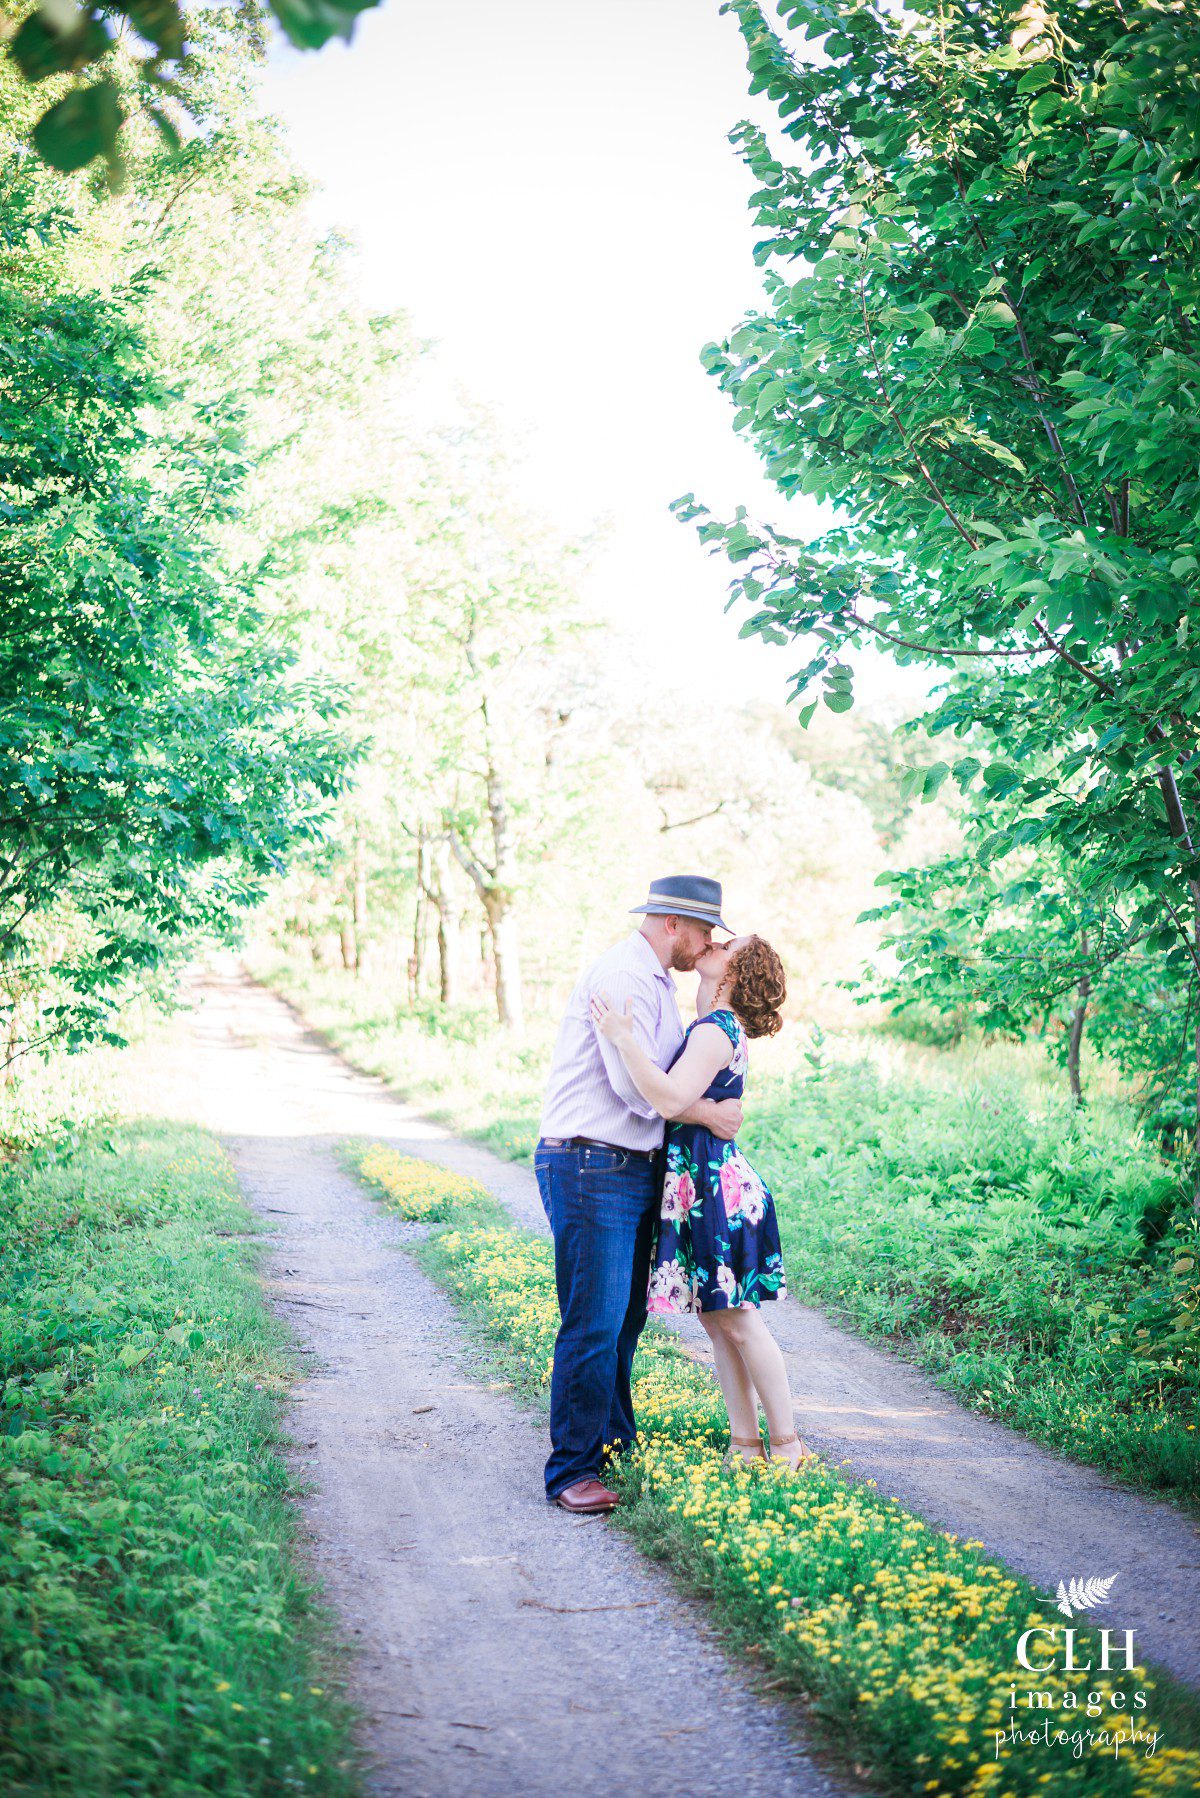 CLH images Photography - Country Engagement Session - Delanson New York - Engagement Photographer - Ashley and Peter (40)